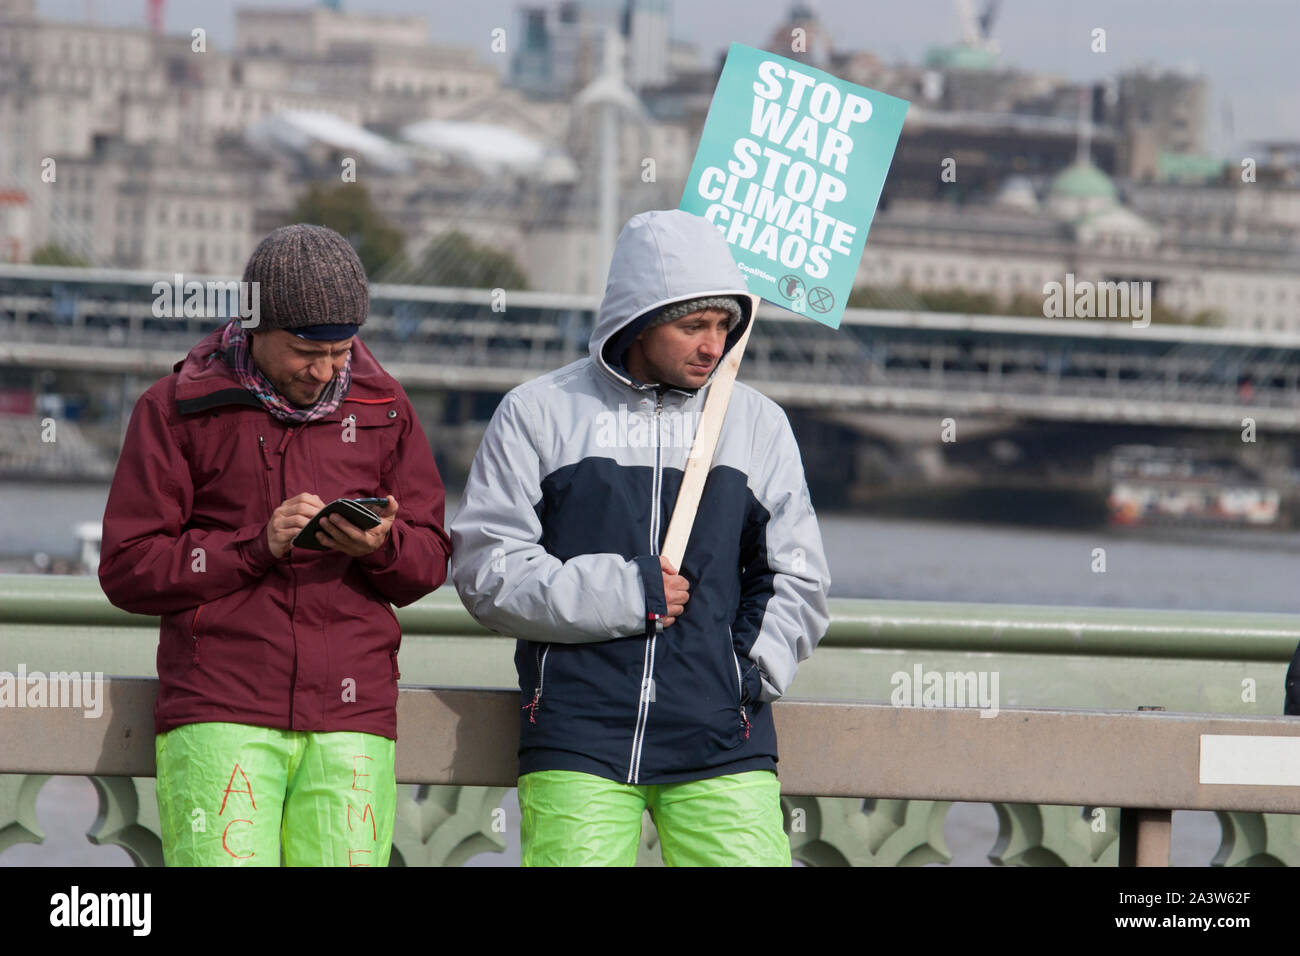 Extinction Rebellion protests, protester with Stop war stop climate chaos, banner on Westminster bridge Stock Photo